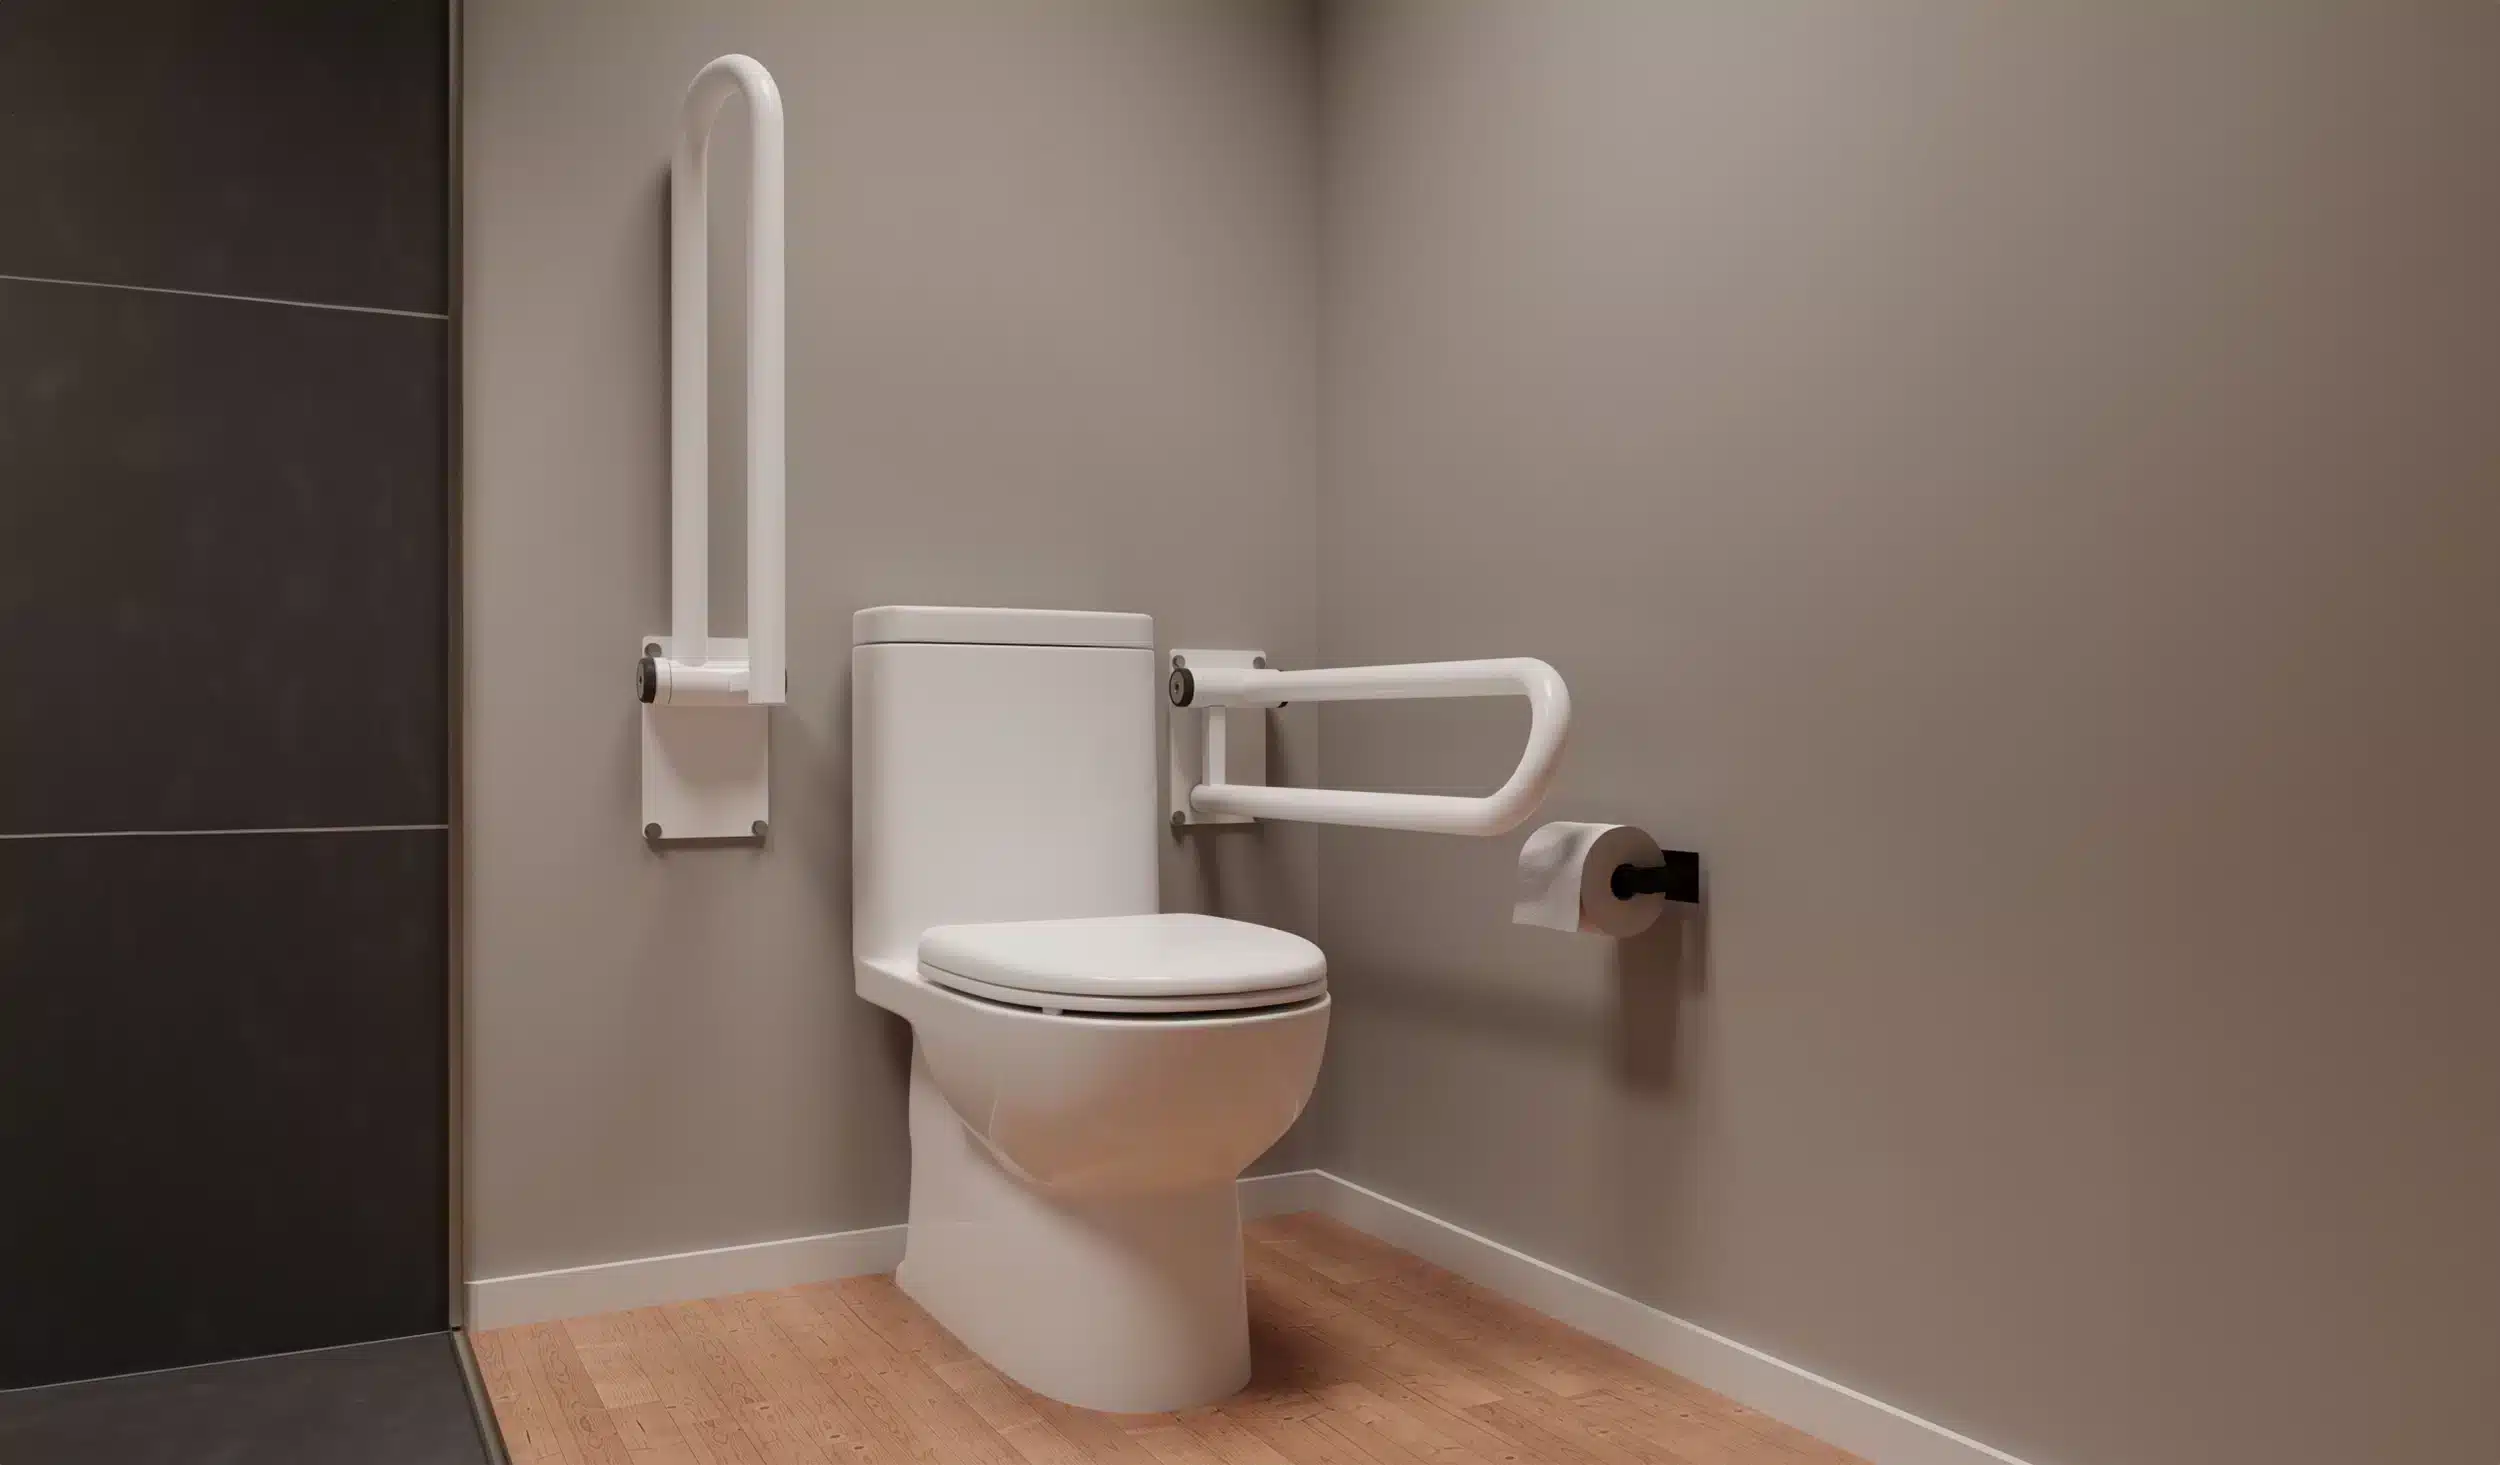 A toilet, located in the corner of a bathroom, has a PT Rail on each side, one is up and the other is down.